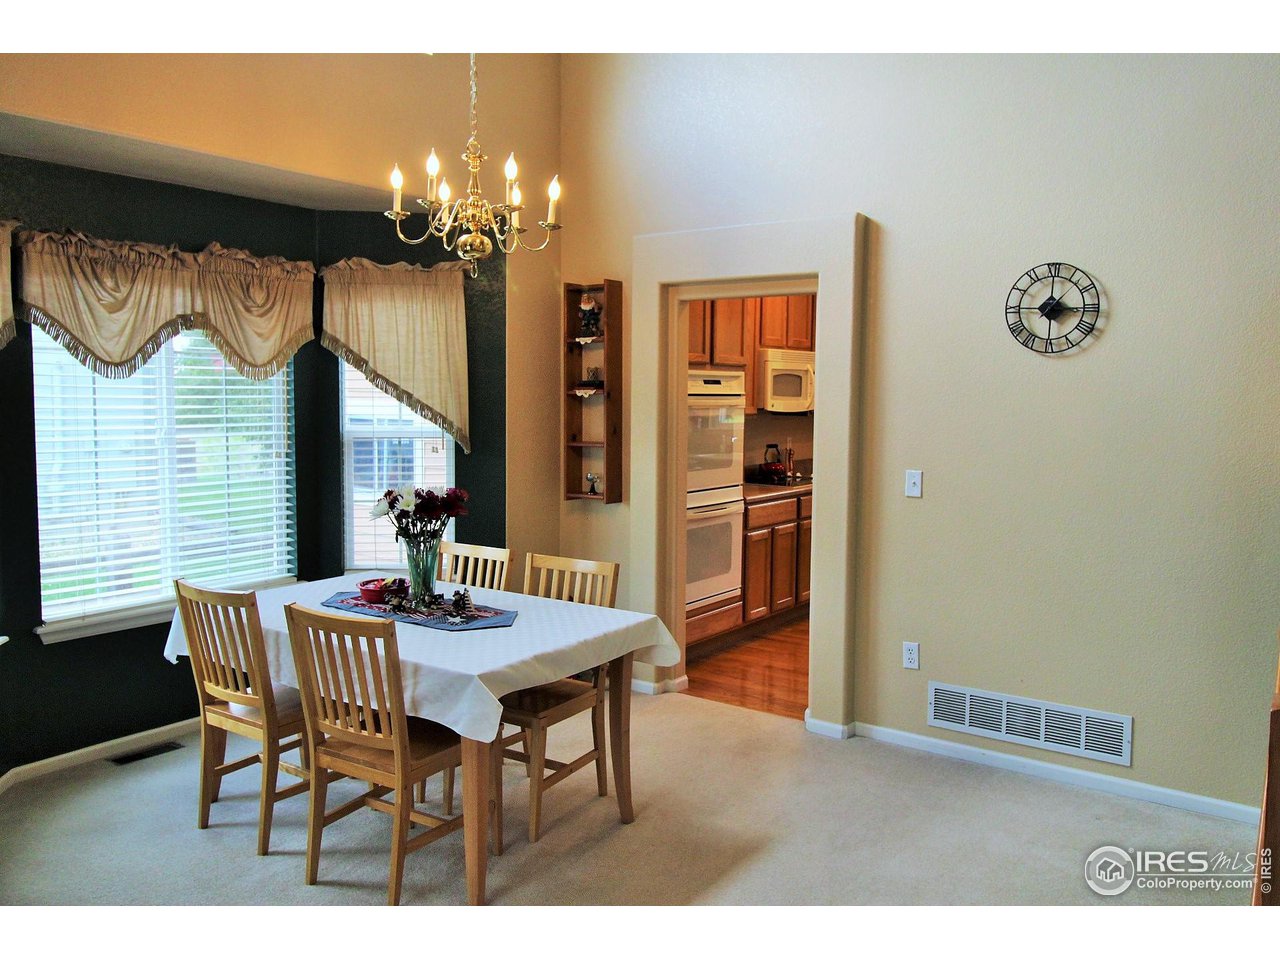 Kitchen flows into the family room with upgraded sliding door to back deck and yard.